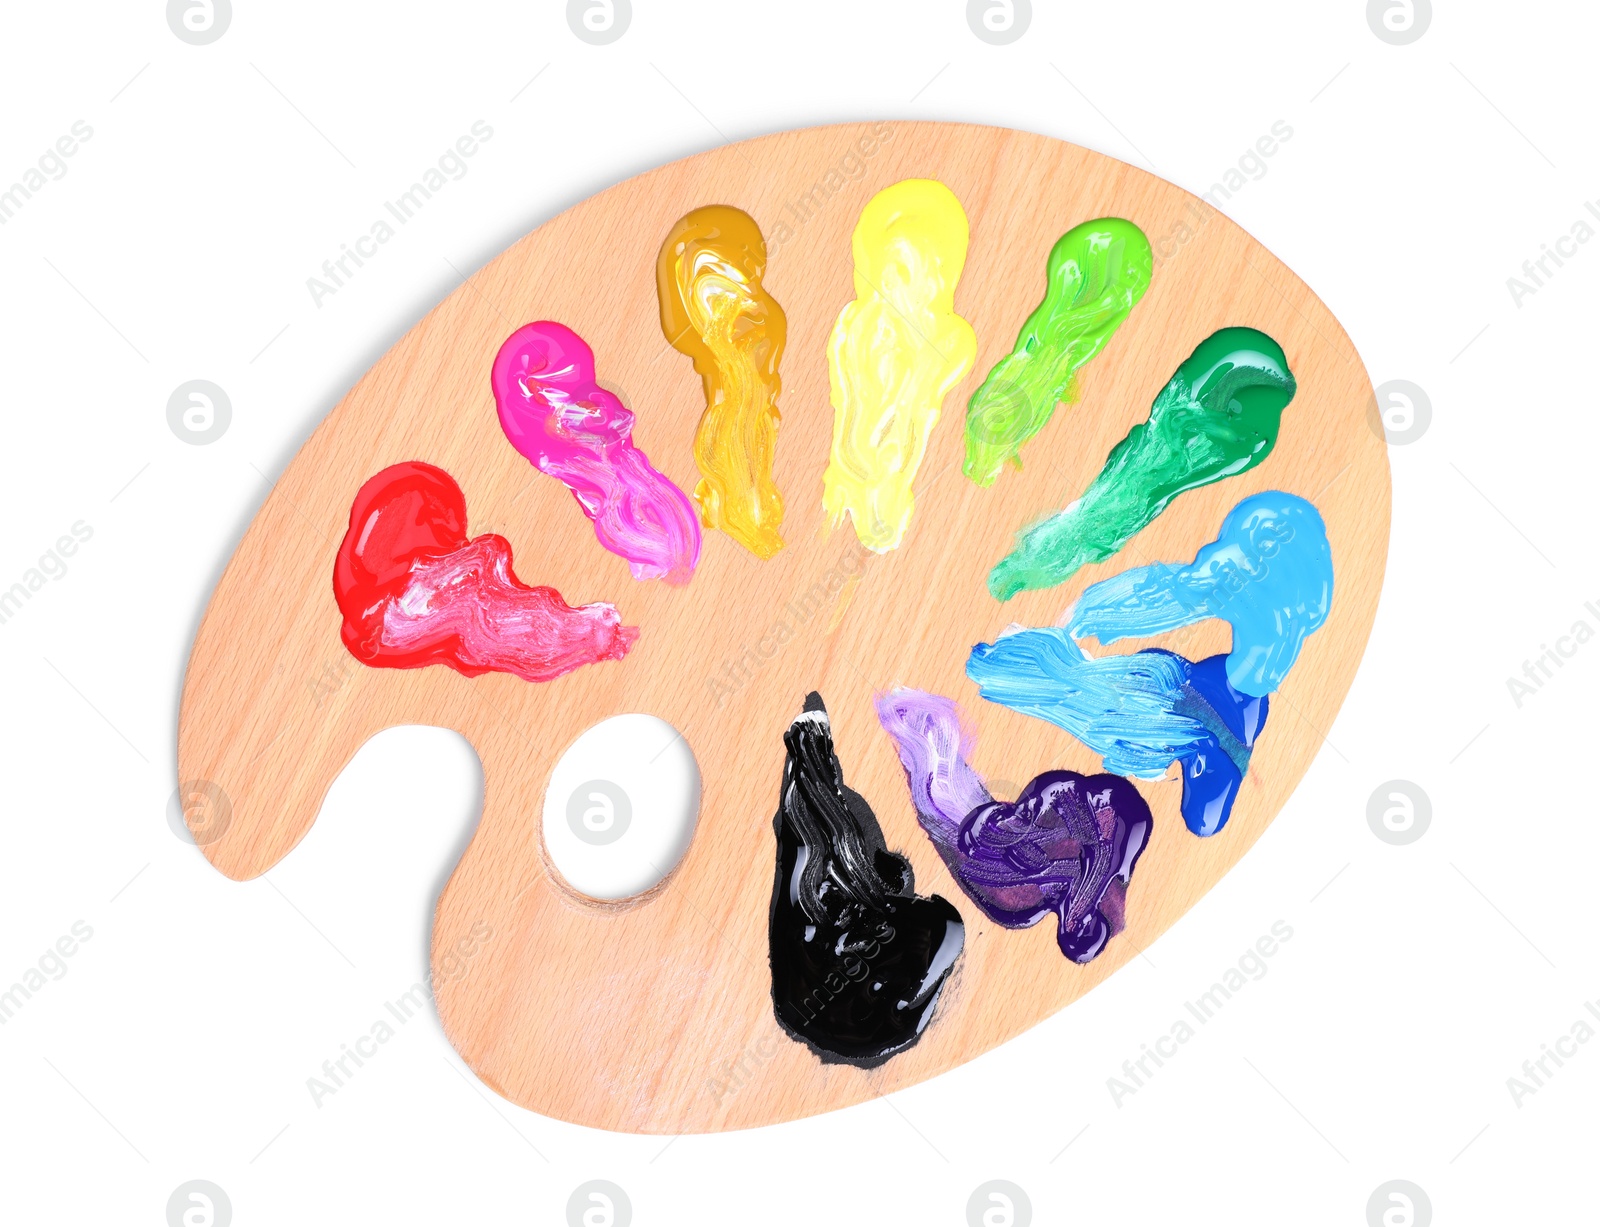 Photo of Palette with paints on white background, top view. Artist equipment